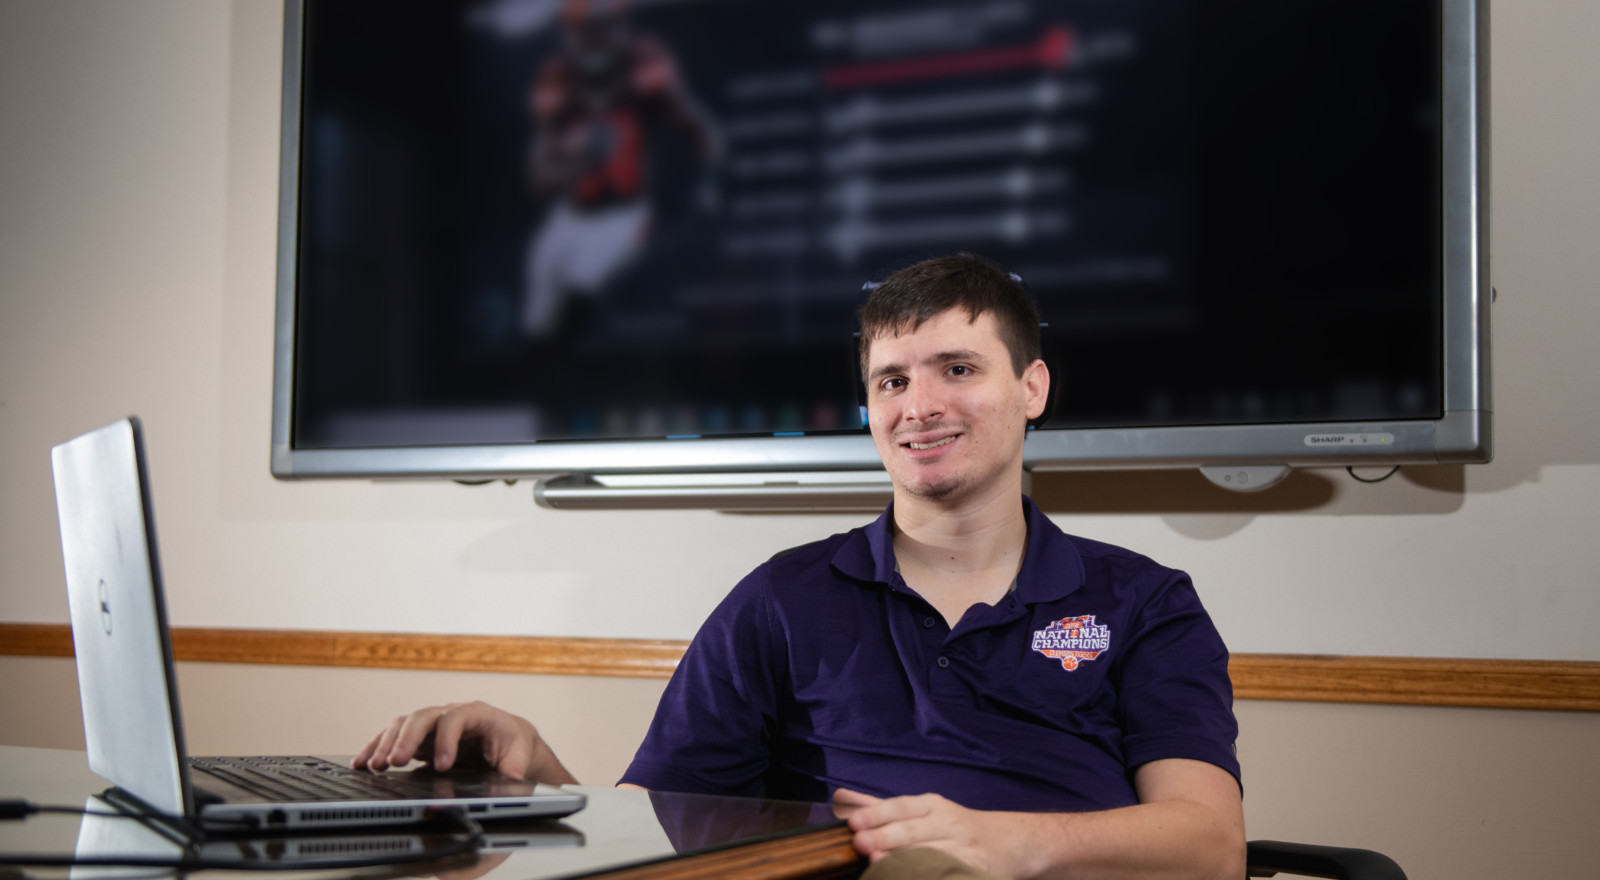 Jeremy Losak researched daily fantasy sports compeititions